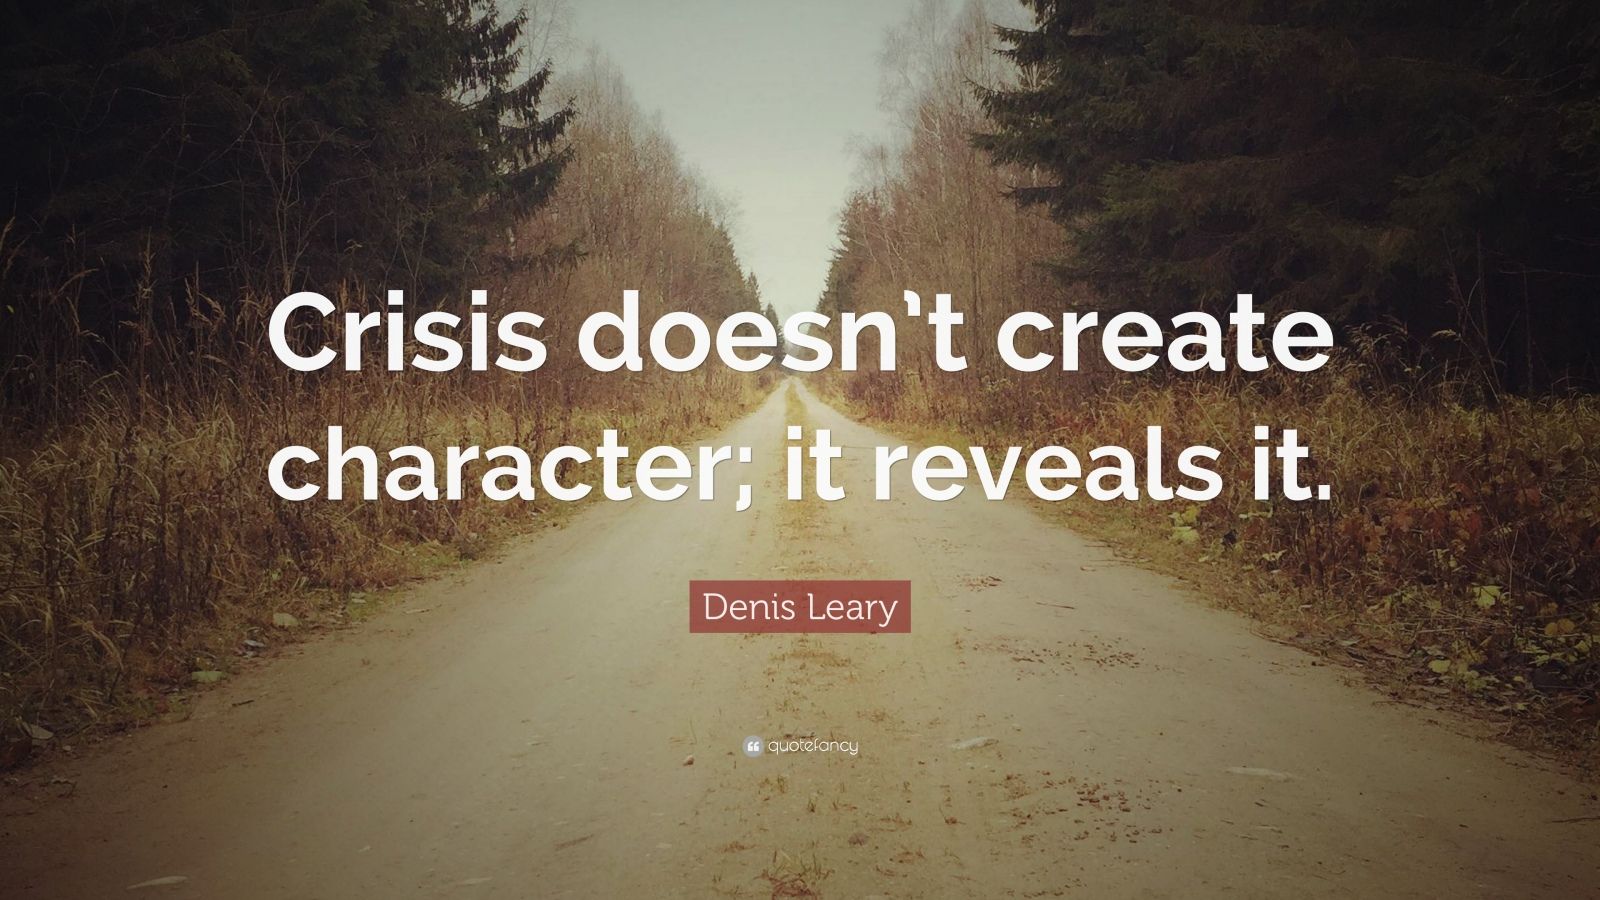 Denis Leary Quote: “Crisis doesn’t create character; it reveals it